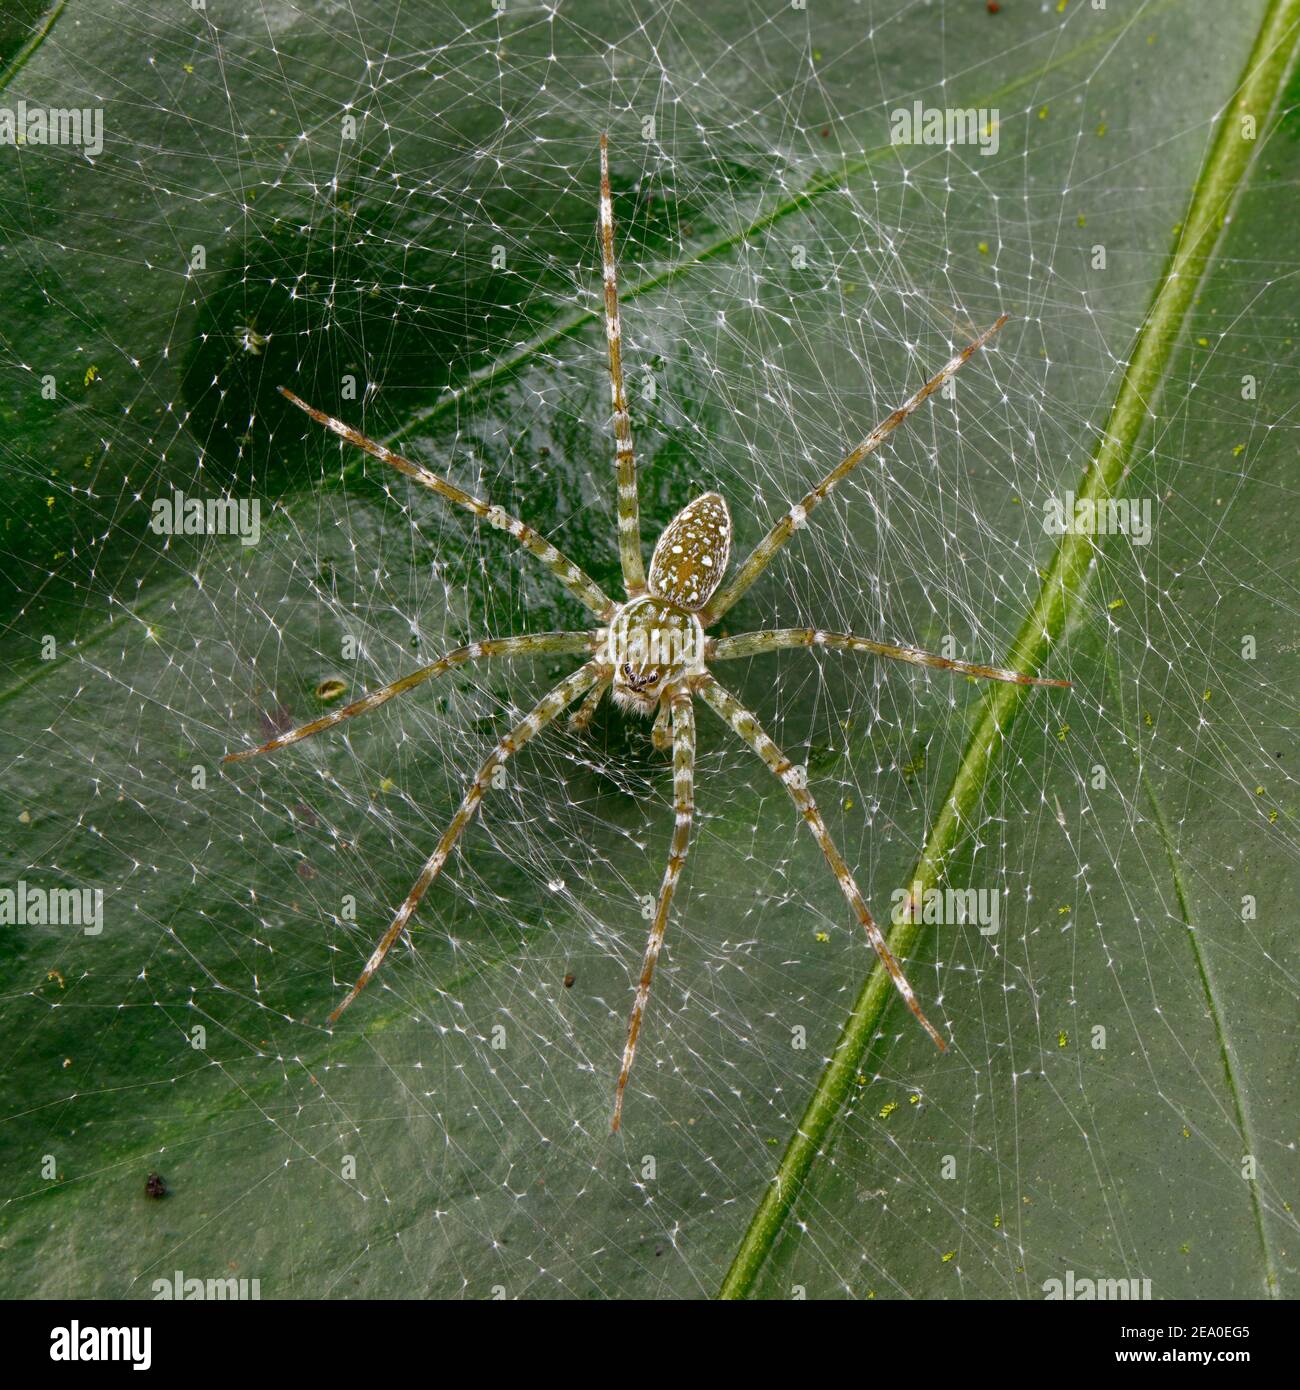 A green fishing spider, Dolomedes species, on a web attached to a leaf  Stock Photo - Alamy